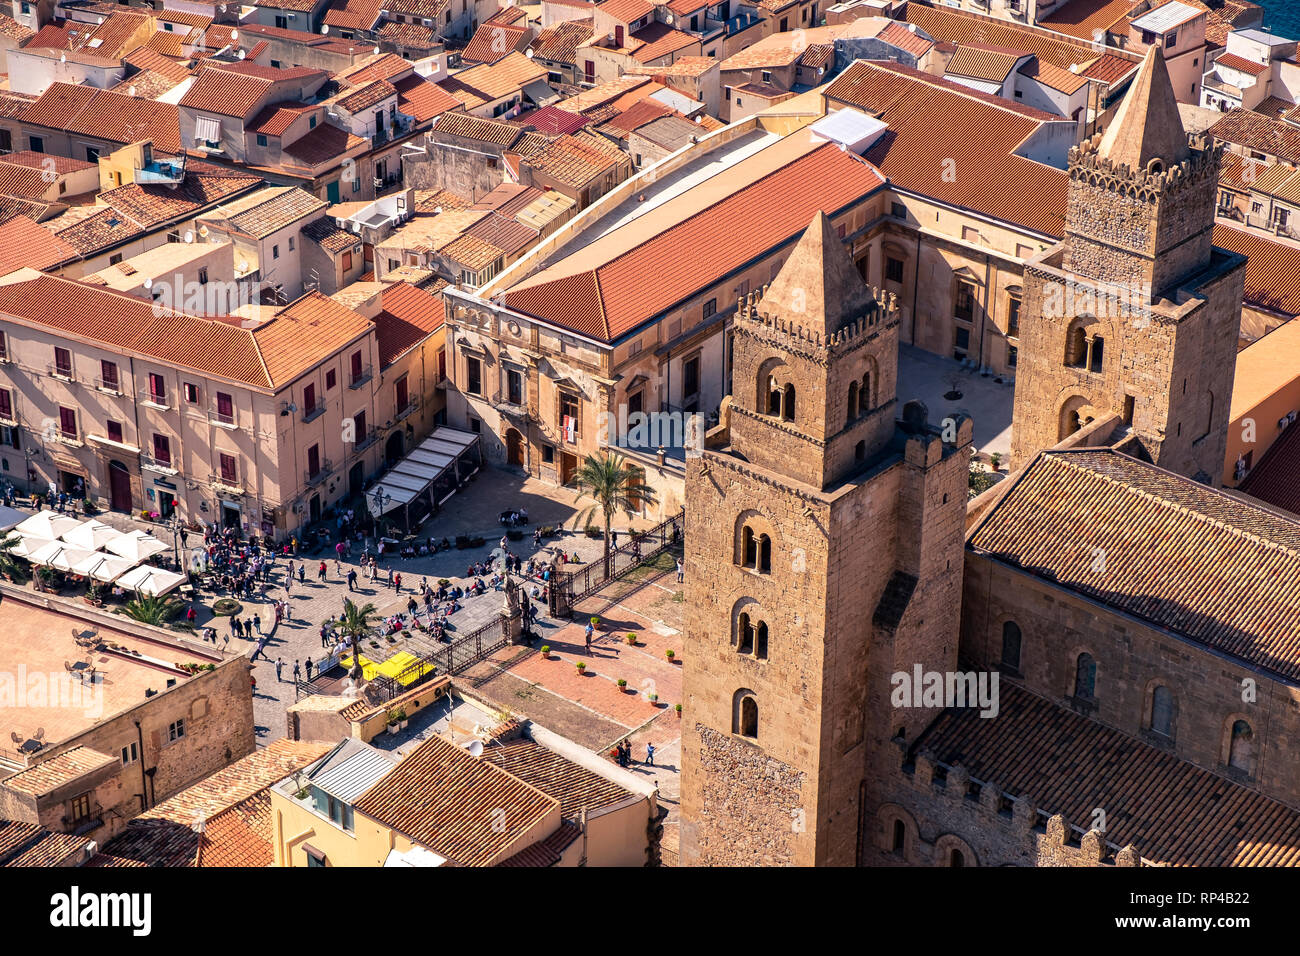 Cefalu Cathedral seen from above, Arab-Norman architecture in Sicily. Italy Stock Photo